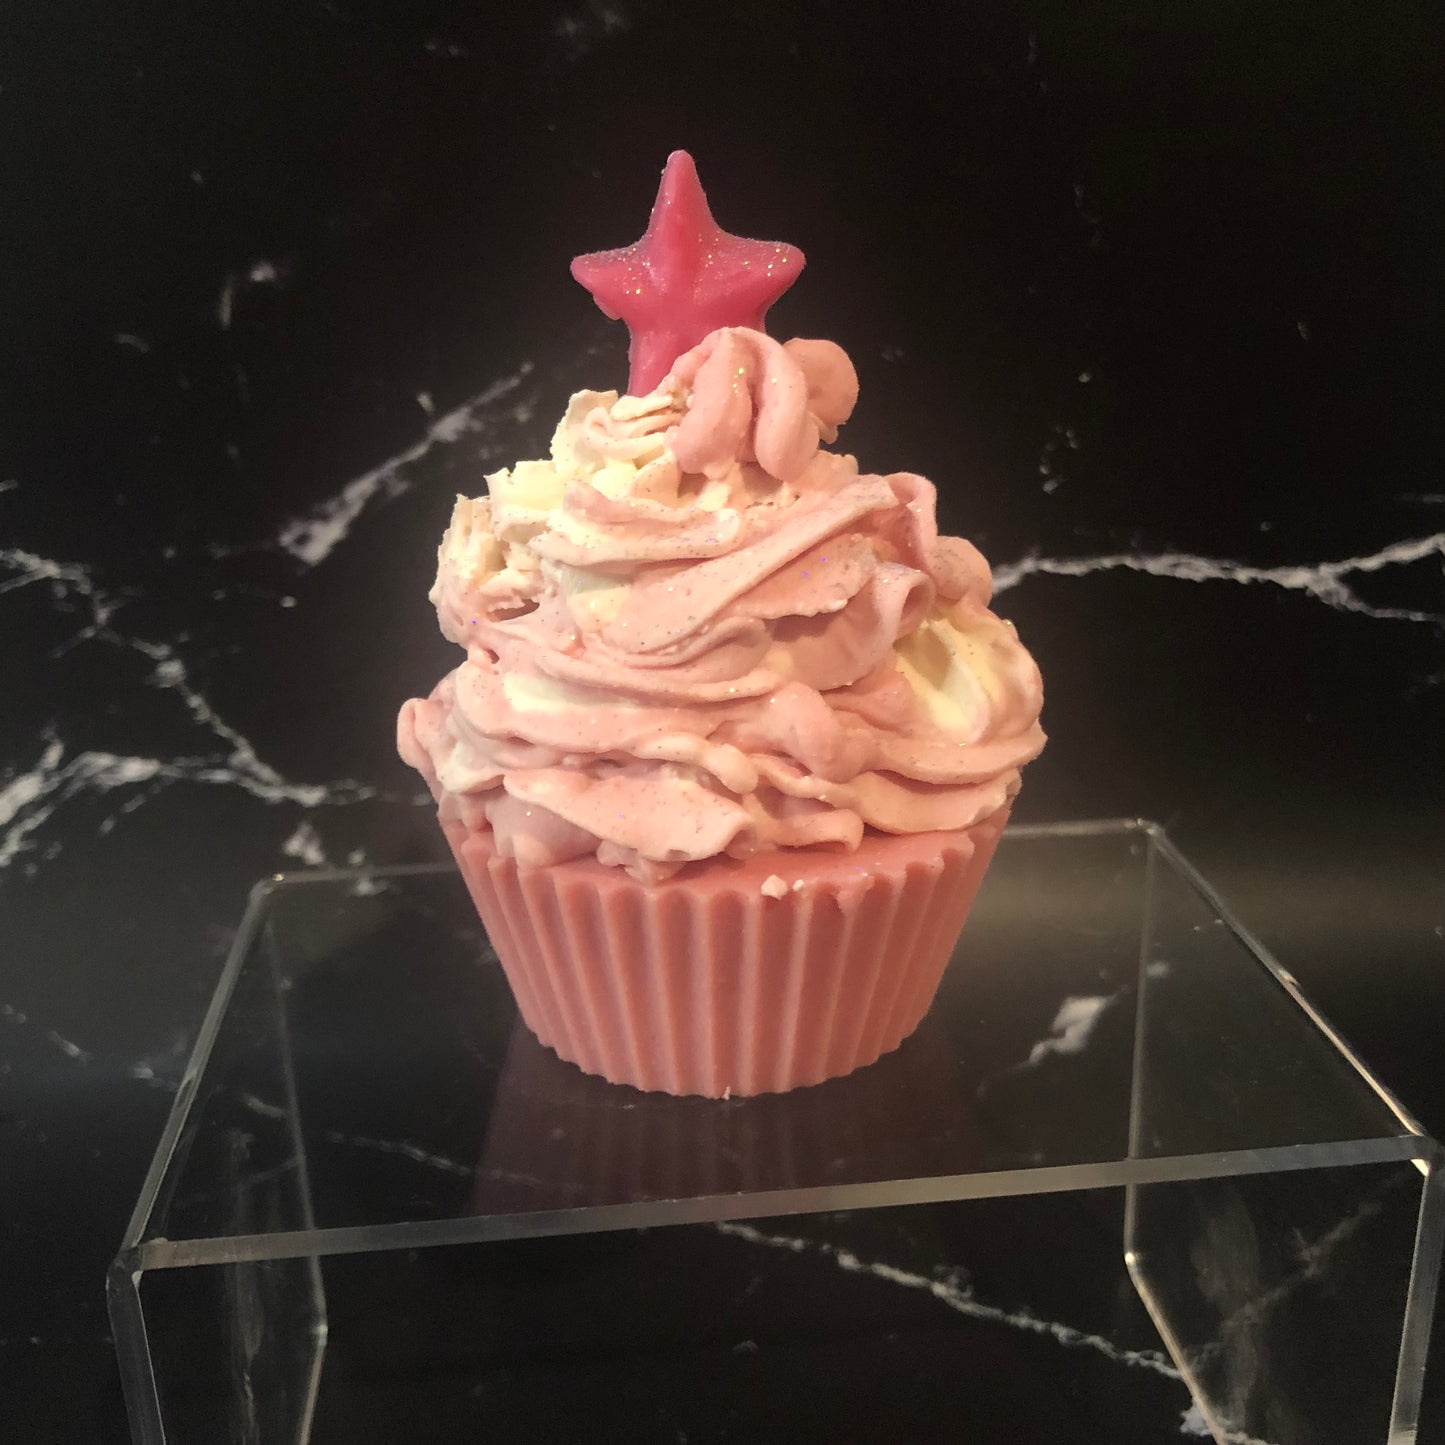 Pink Star Cupcake Soap handmade homemade handcrafted vegan candy food-like gluten-free sulphate-free party gift